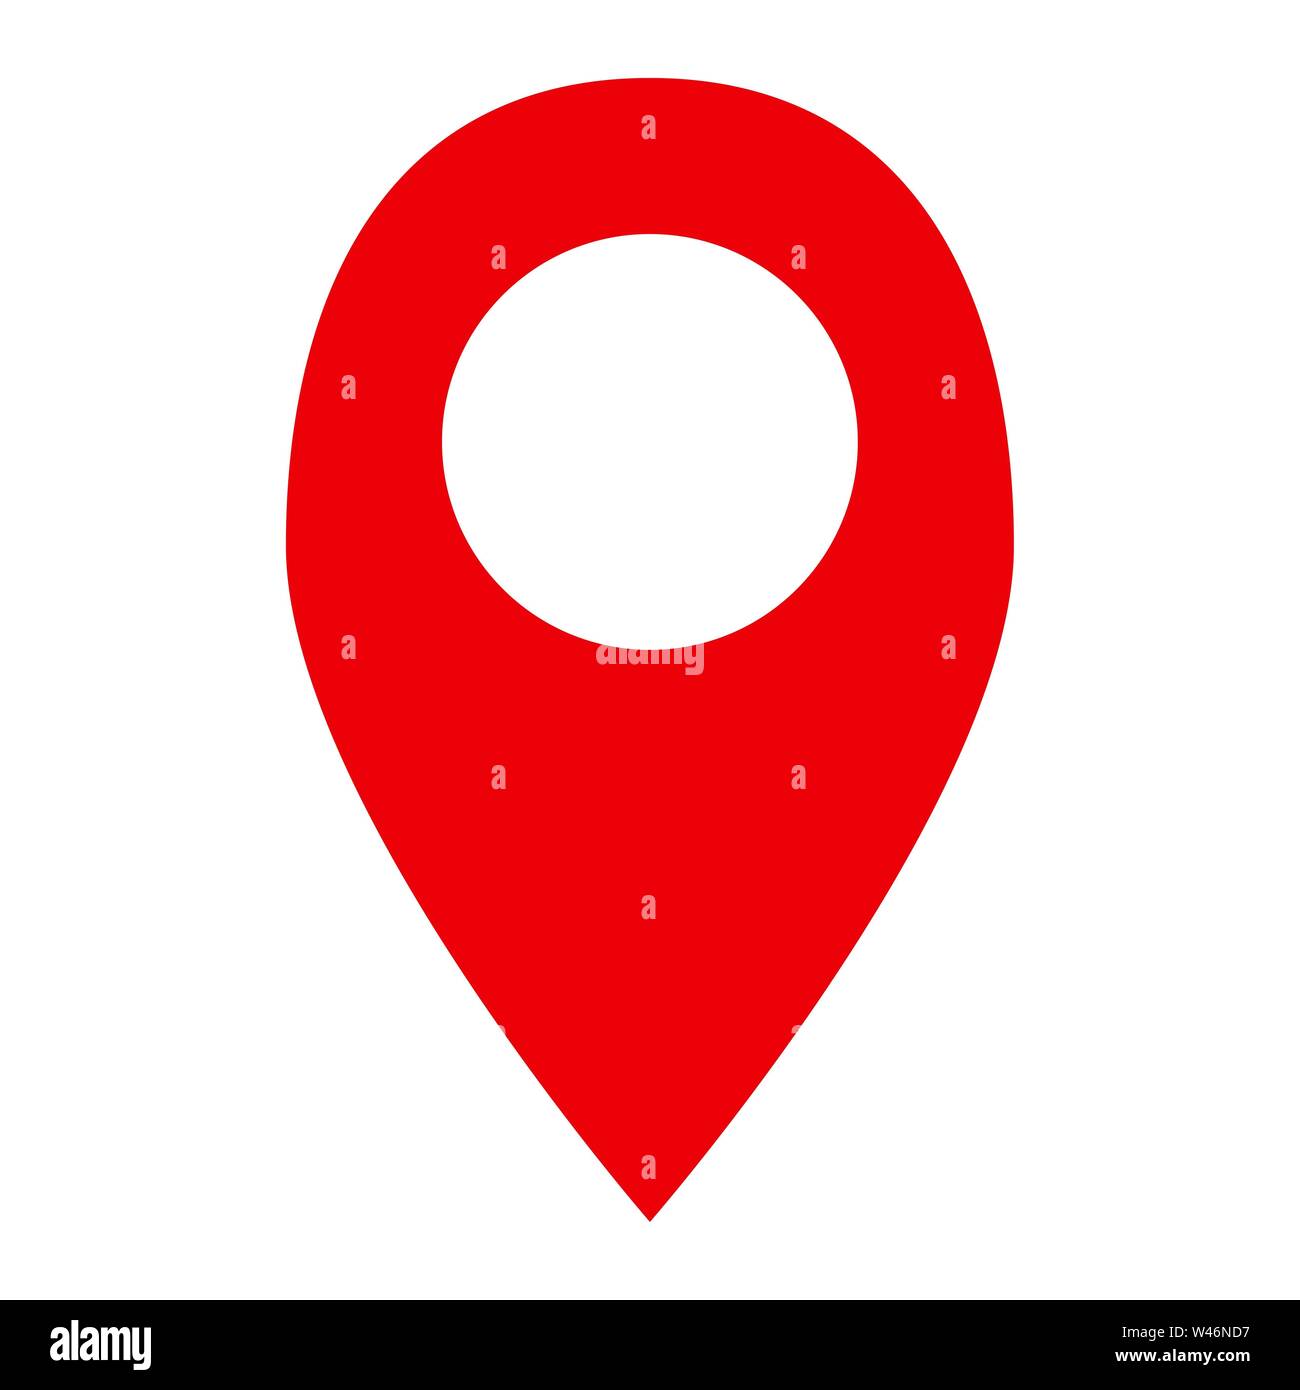 location pin map icon or logo illustration. Perfect use for website, pattern, design, etc. Stock Photo